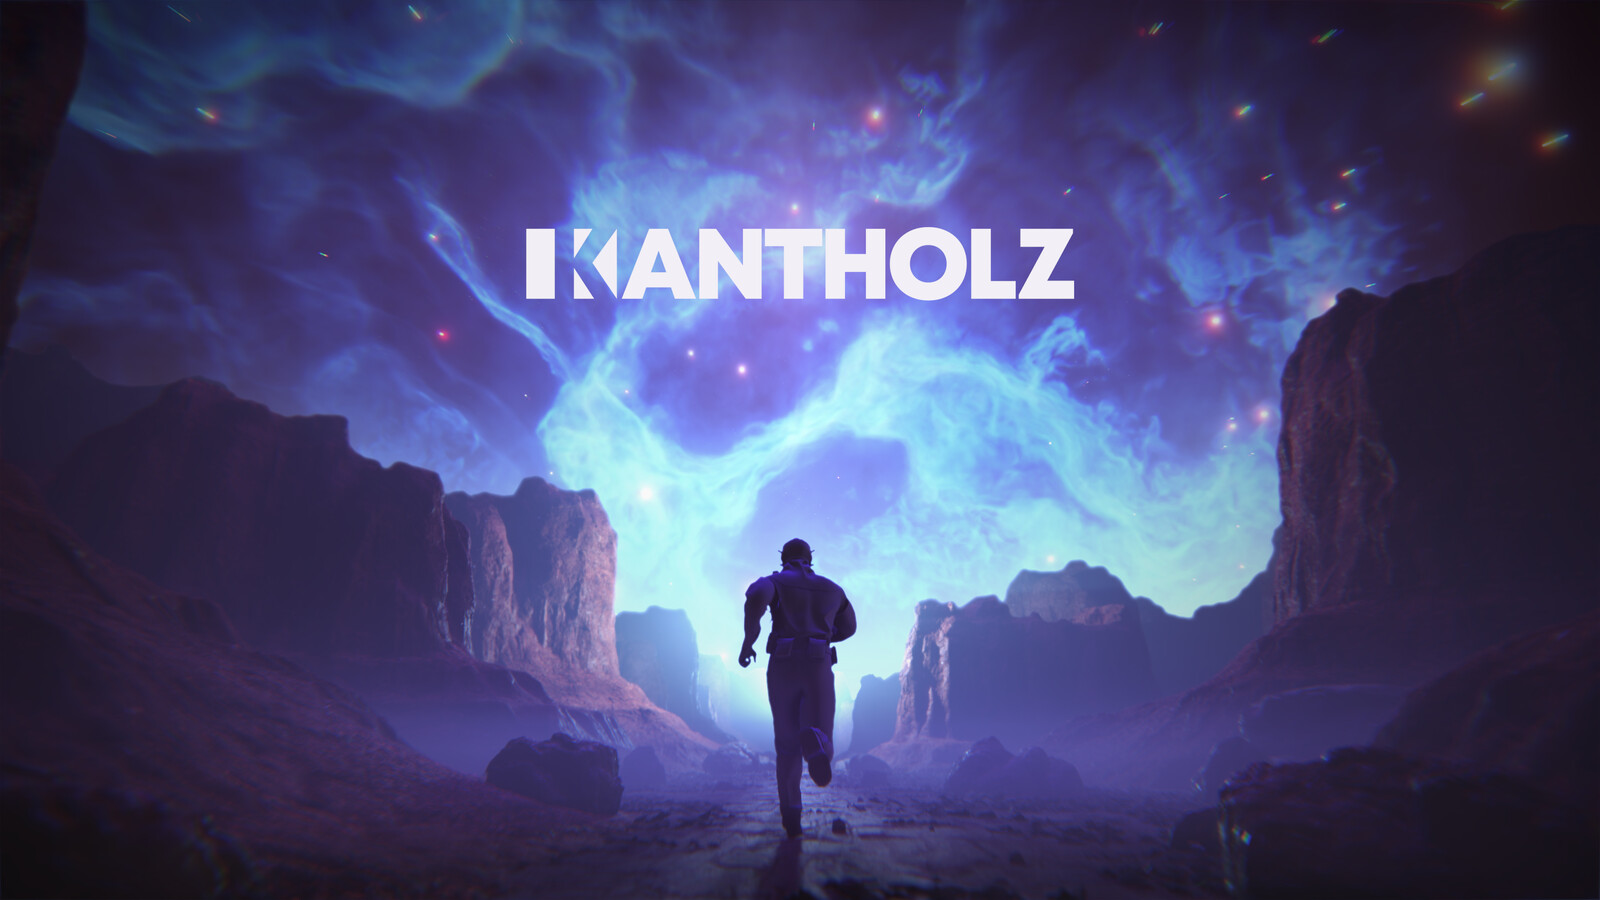 music video for "traumfaenger" by Kantholz